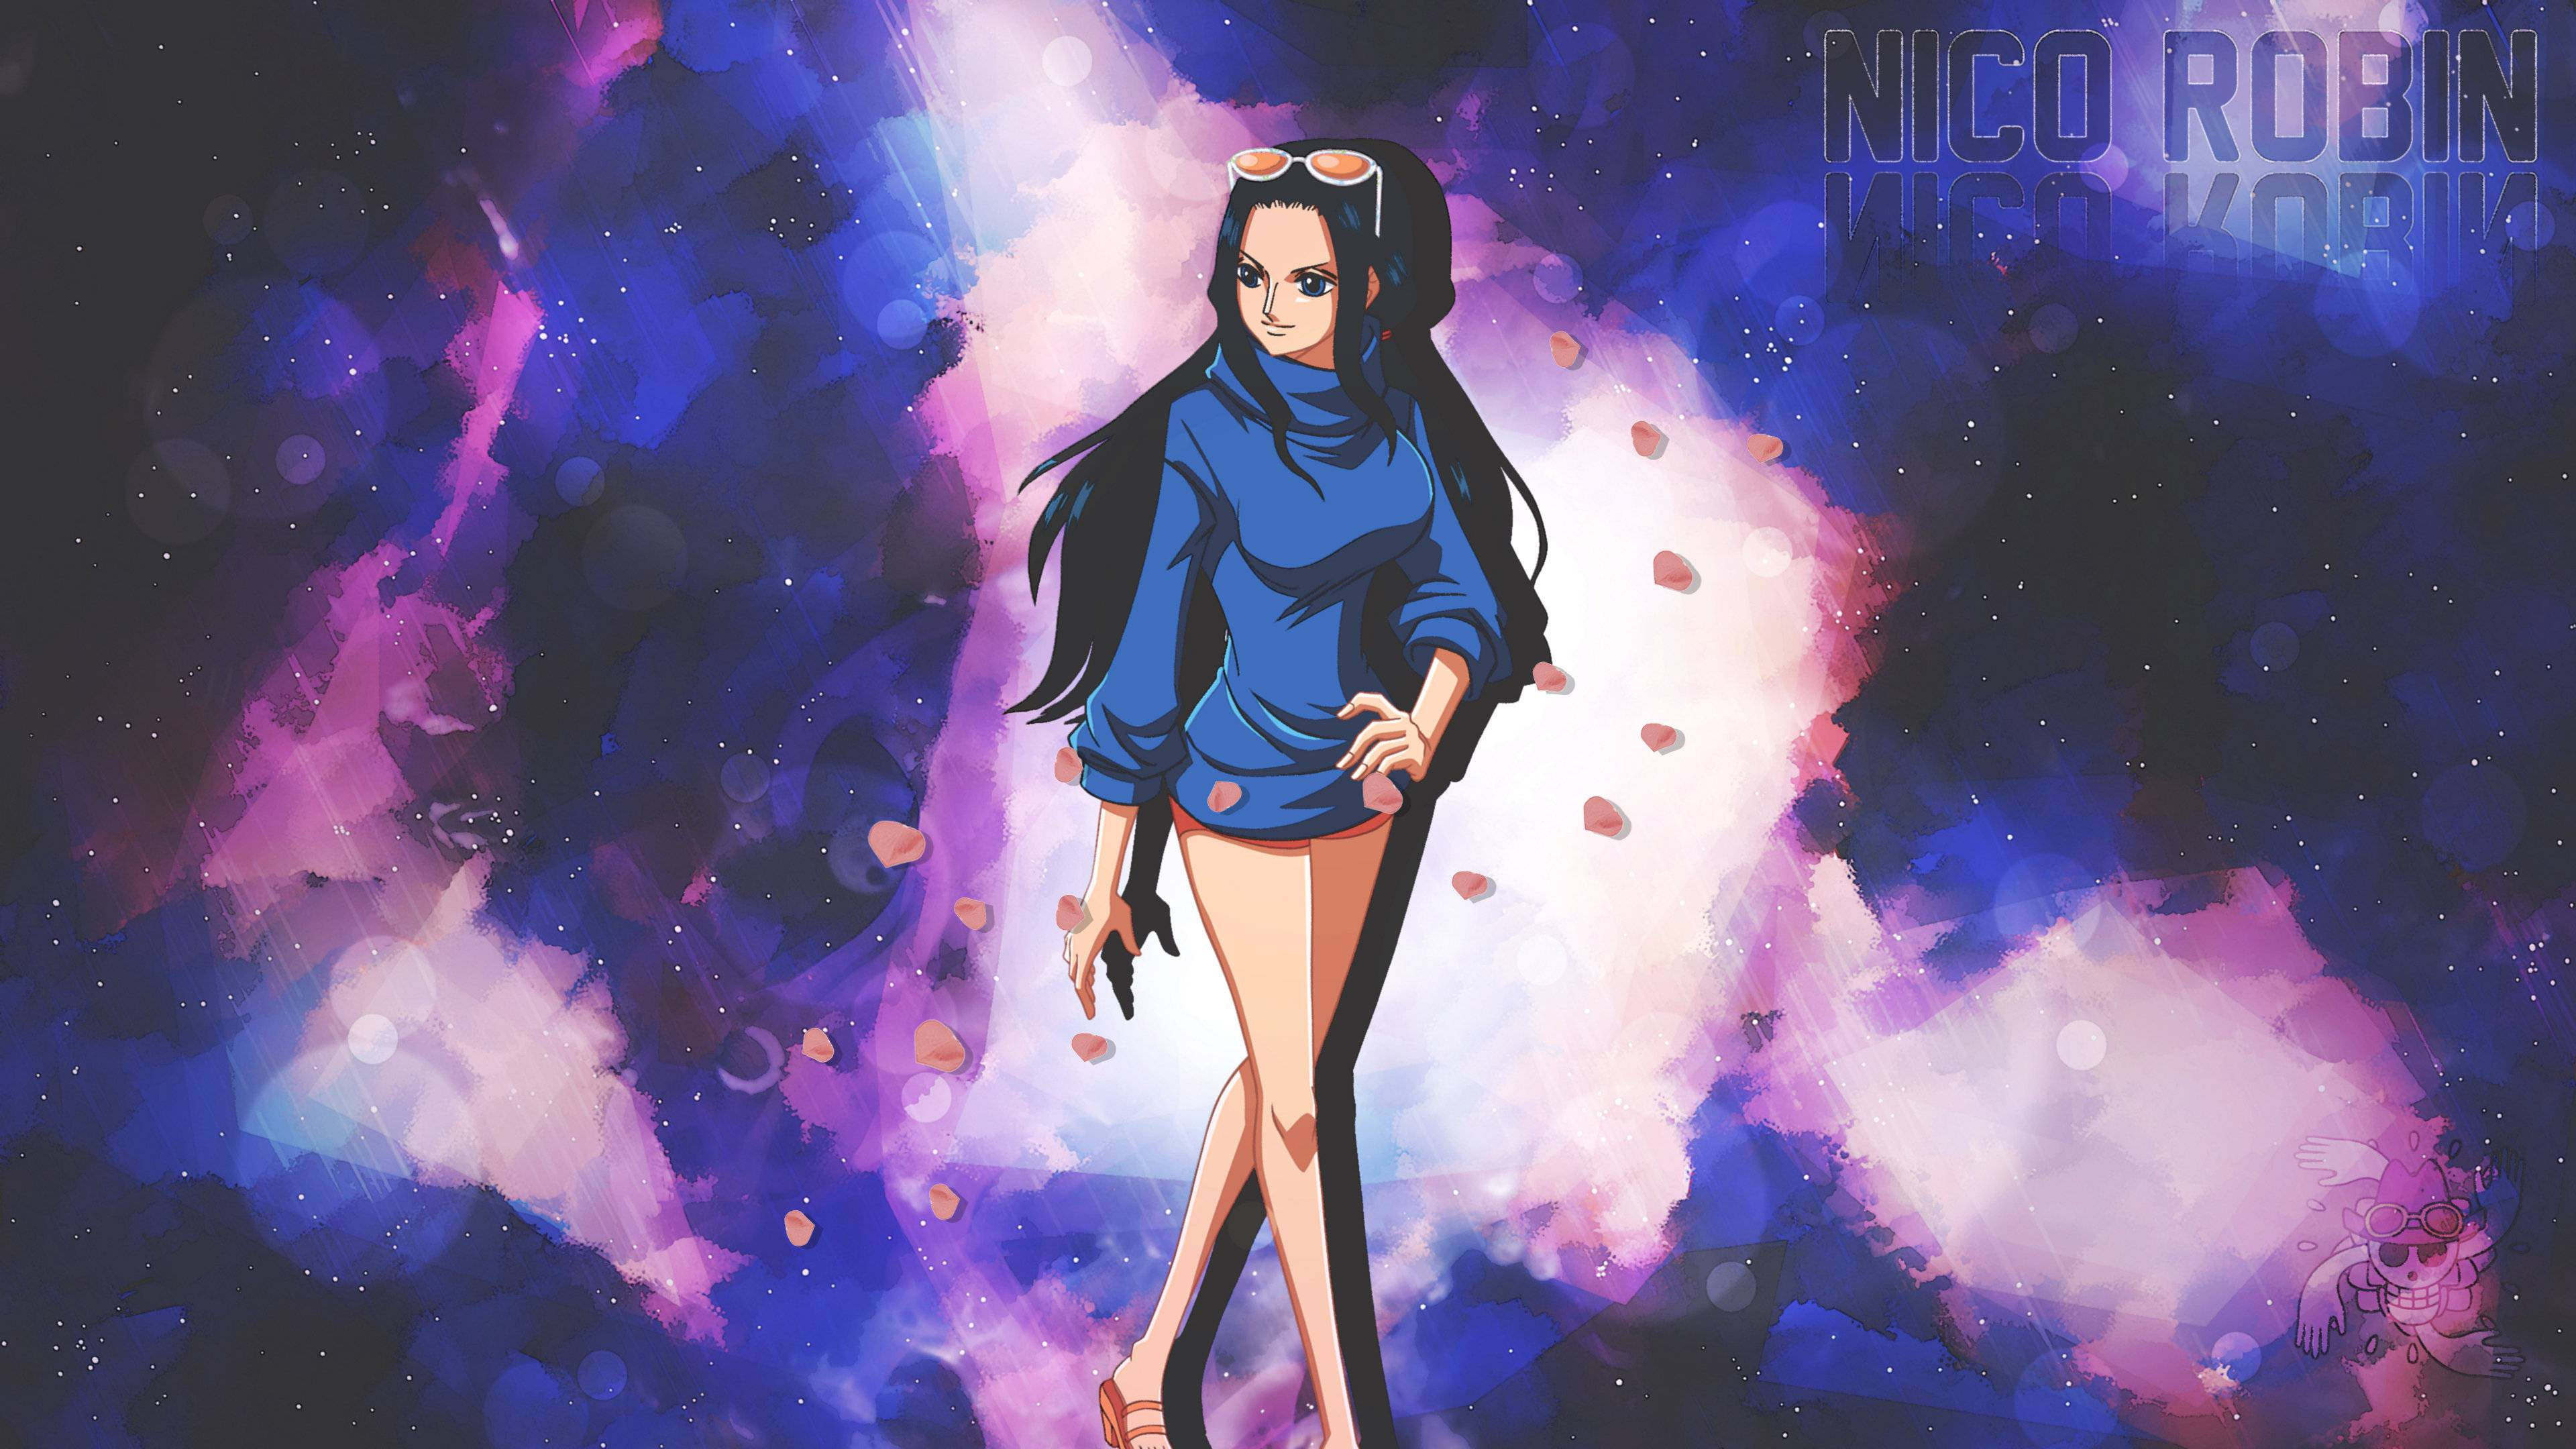 Download One Piece Live Nico Robin Wallpaper | Wallpapers.com